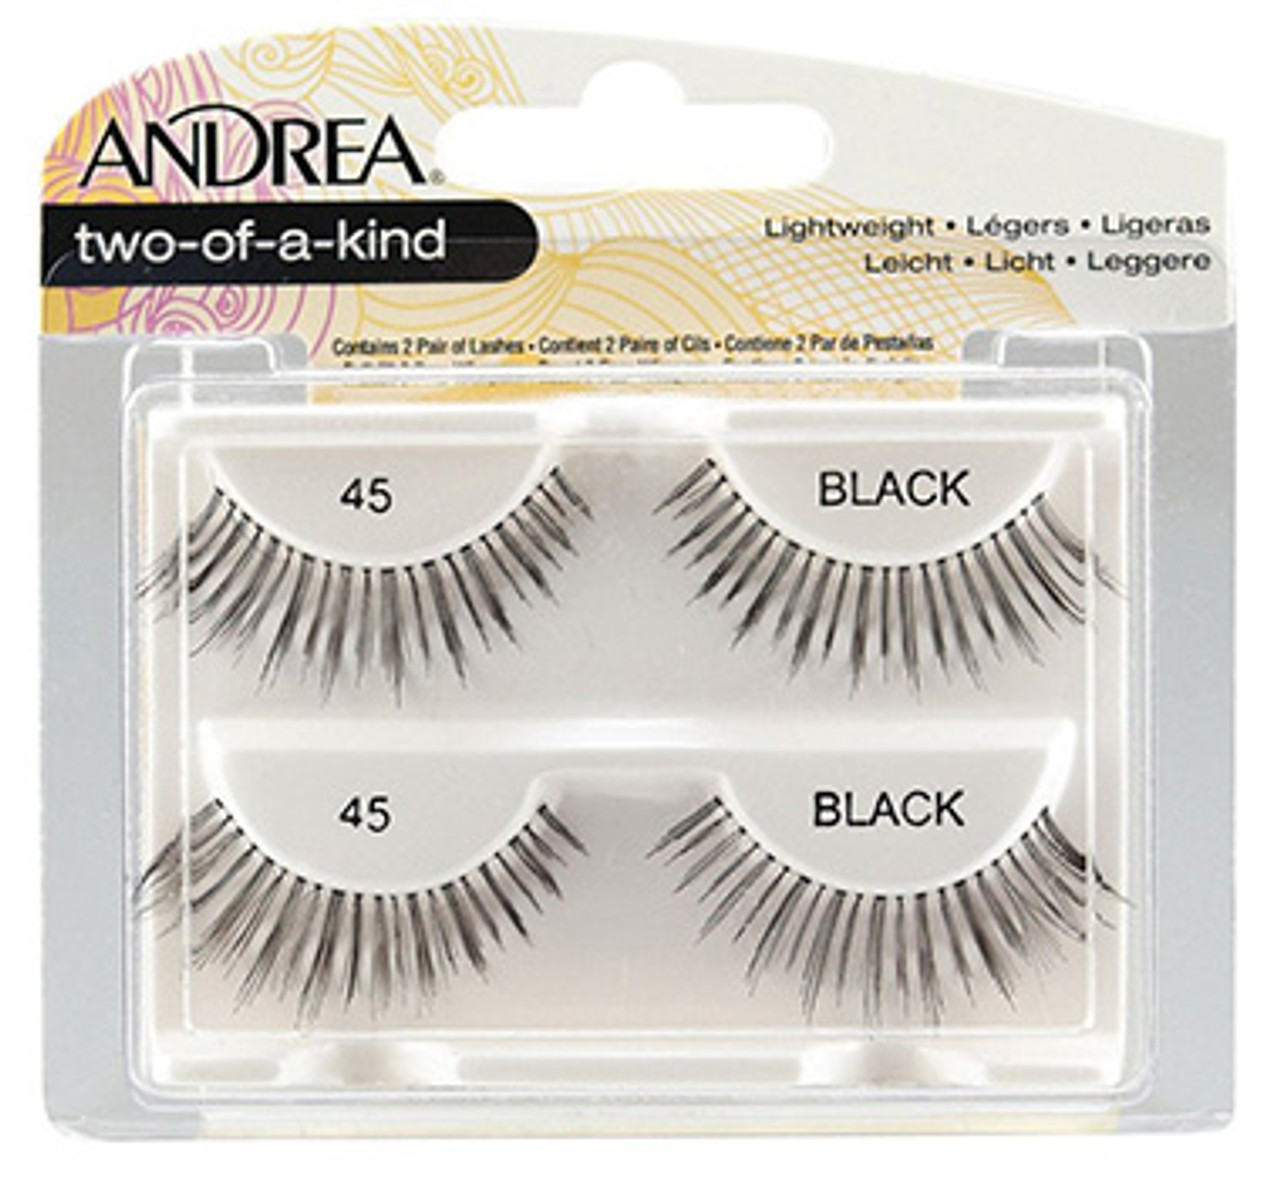 Andrea Two-of-a-Kind 45 Black